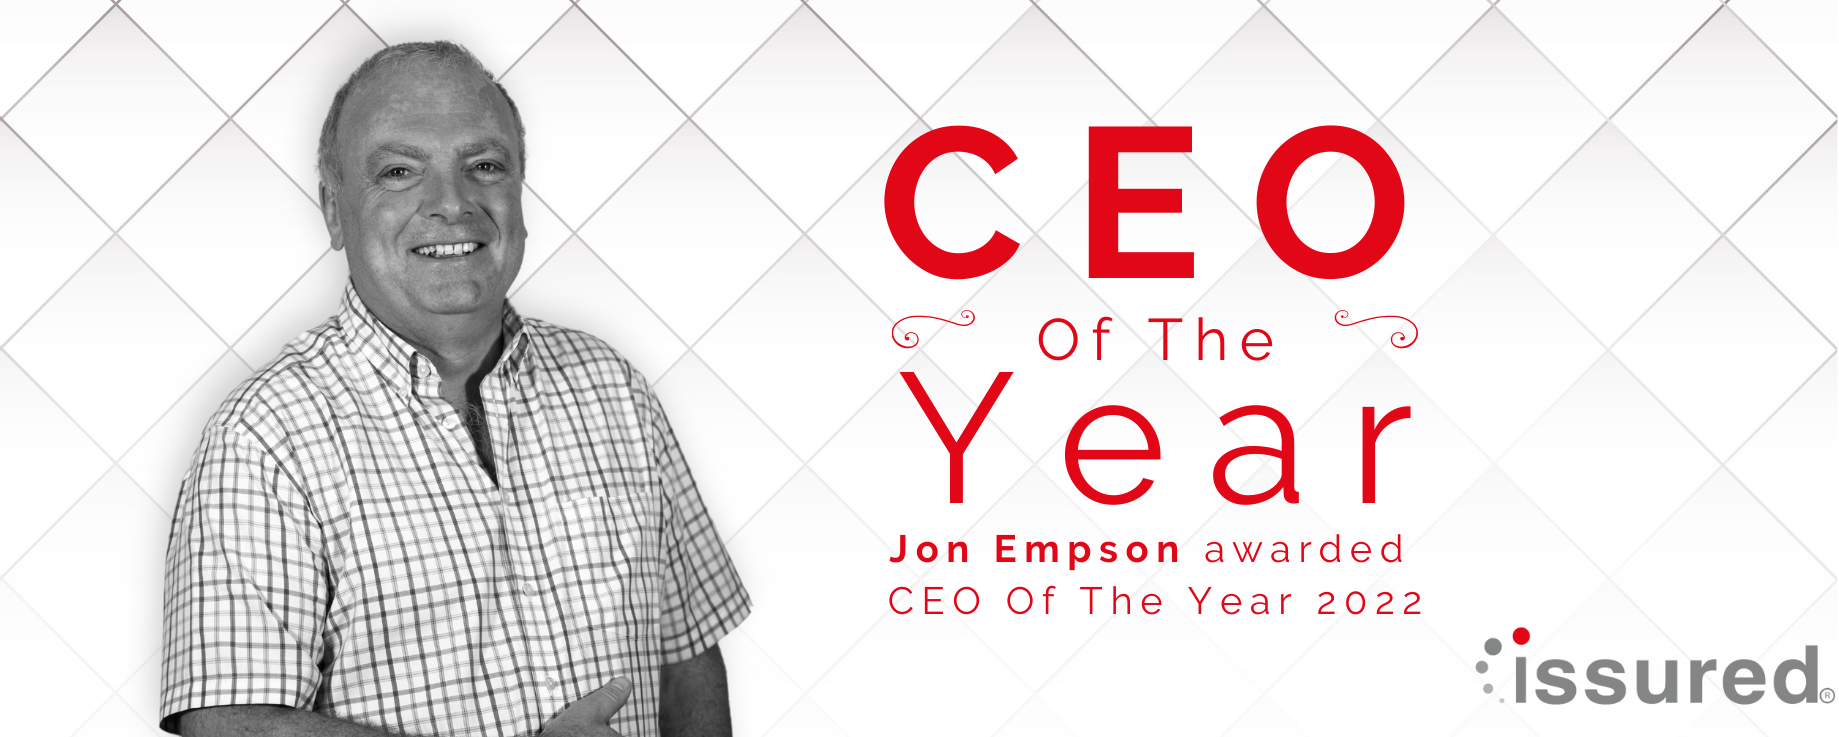 Jon Empson awarded ‘CEO of the Year 2022’ | Digital Transformation Specialists | Issured Ltd